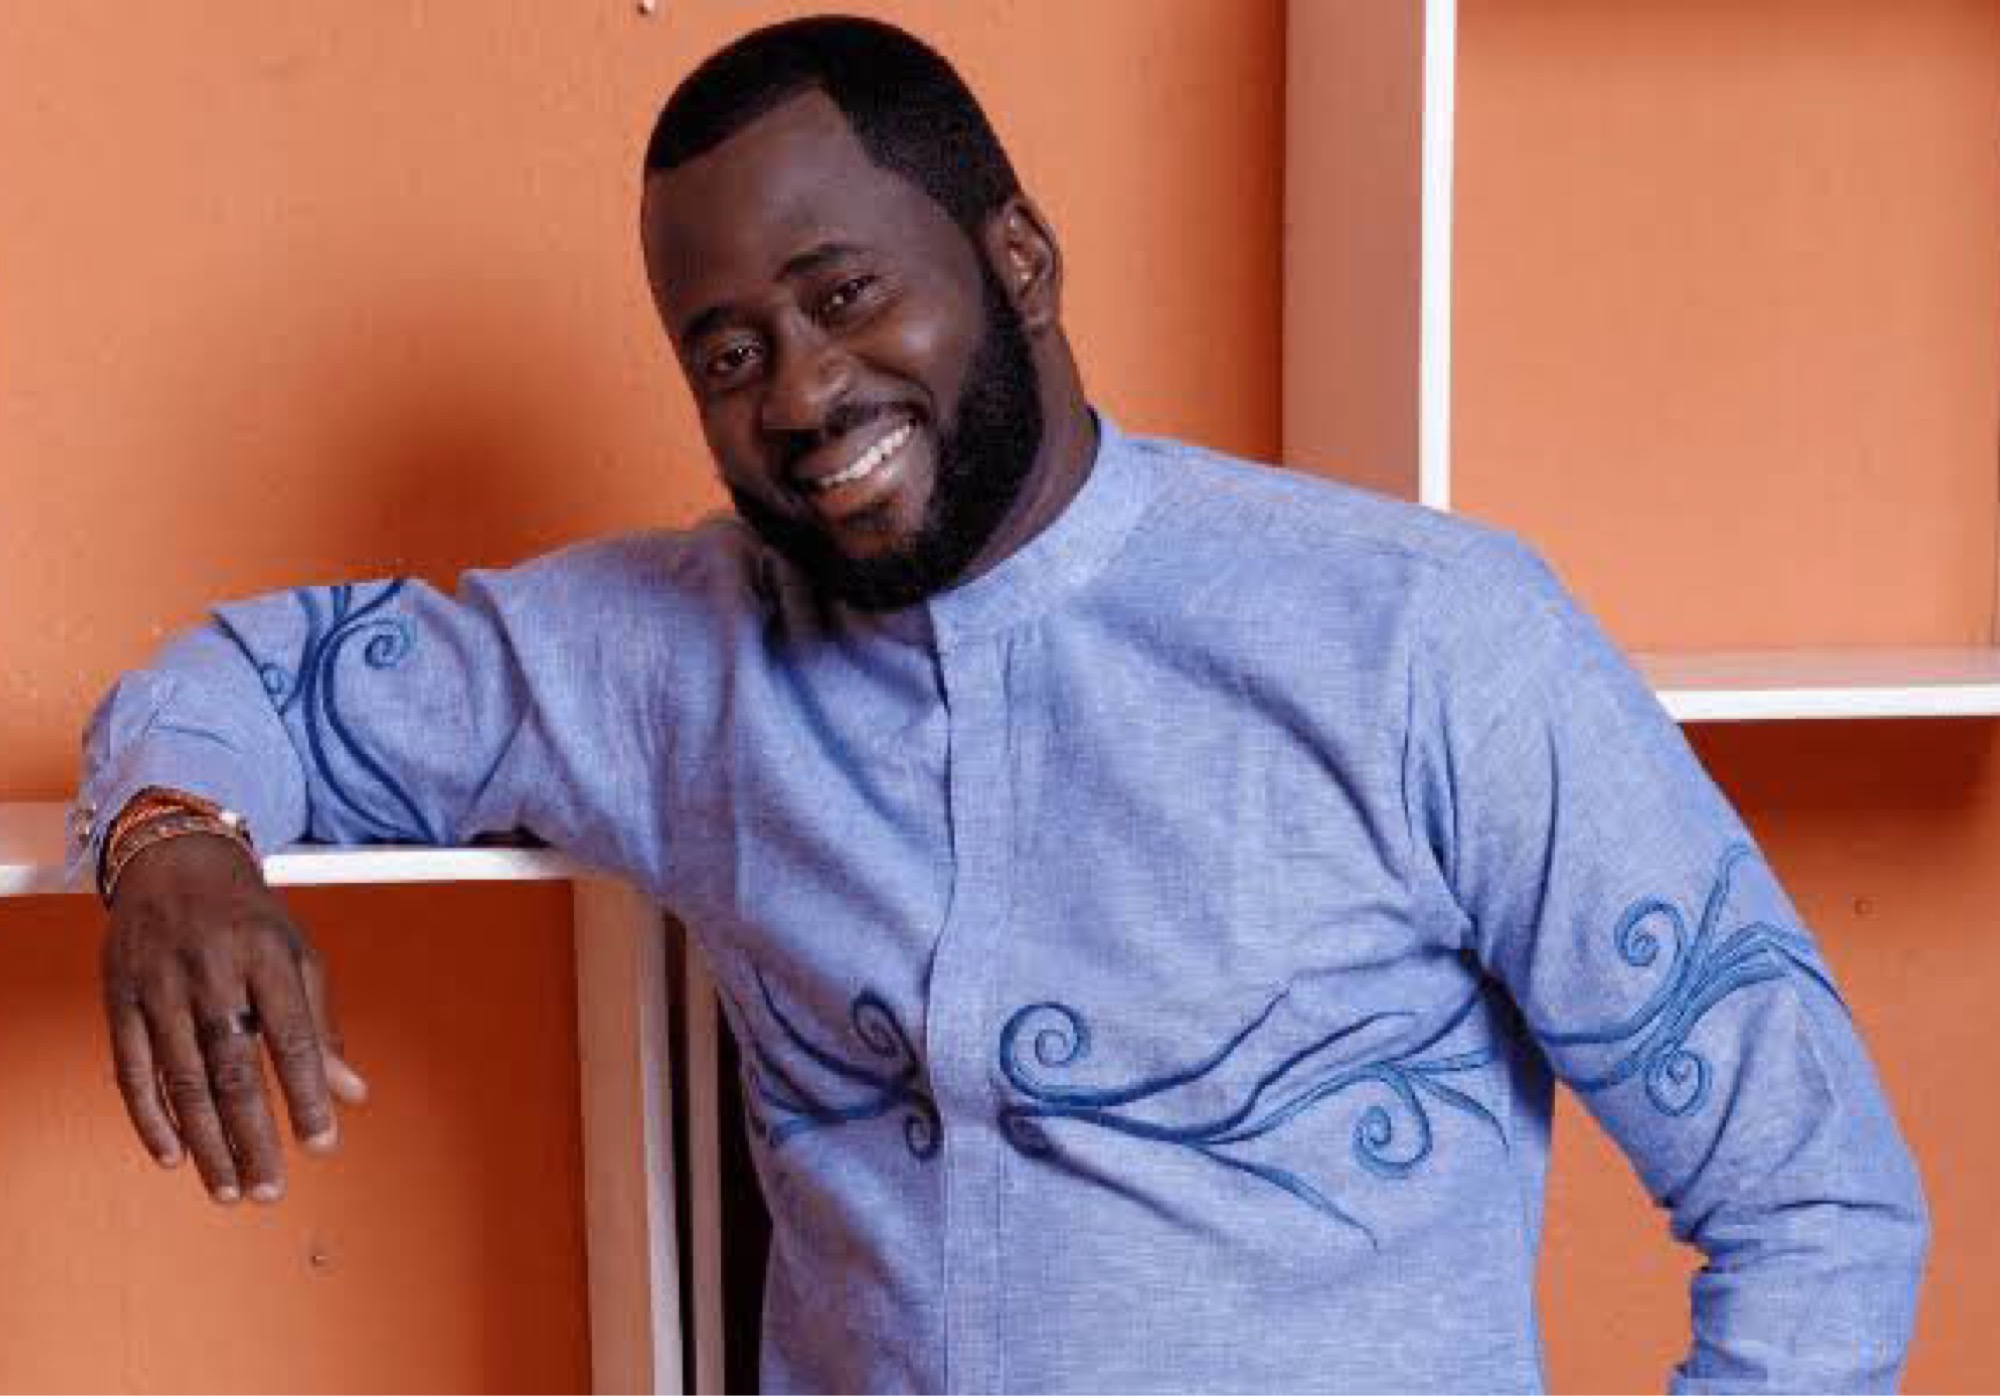 “If You Are Tired, Come And Enter Government” – Desmond Elliot Tells Youths, Who Are Protesting (Video)